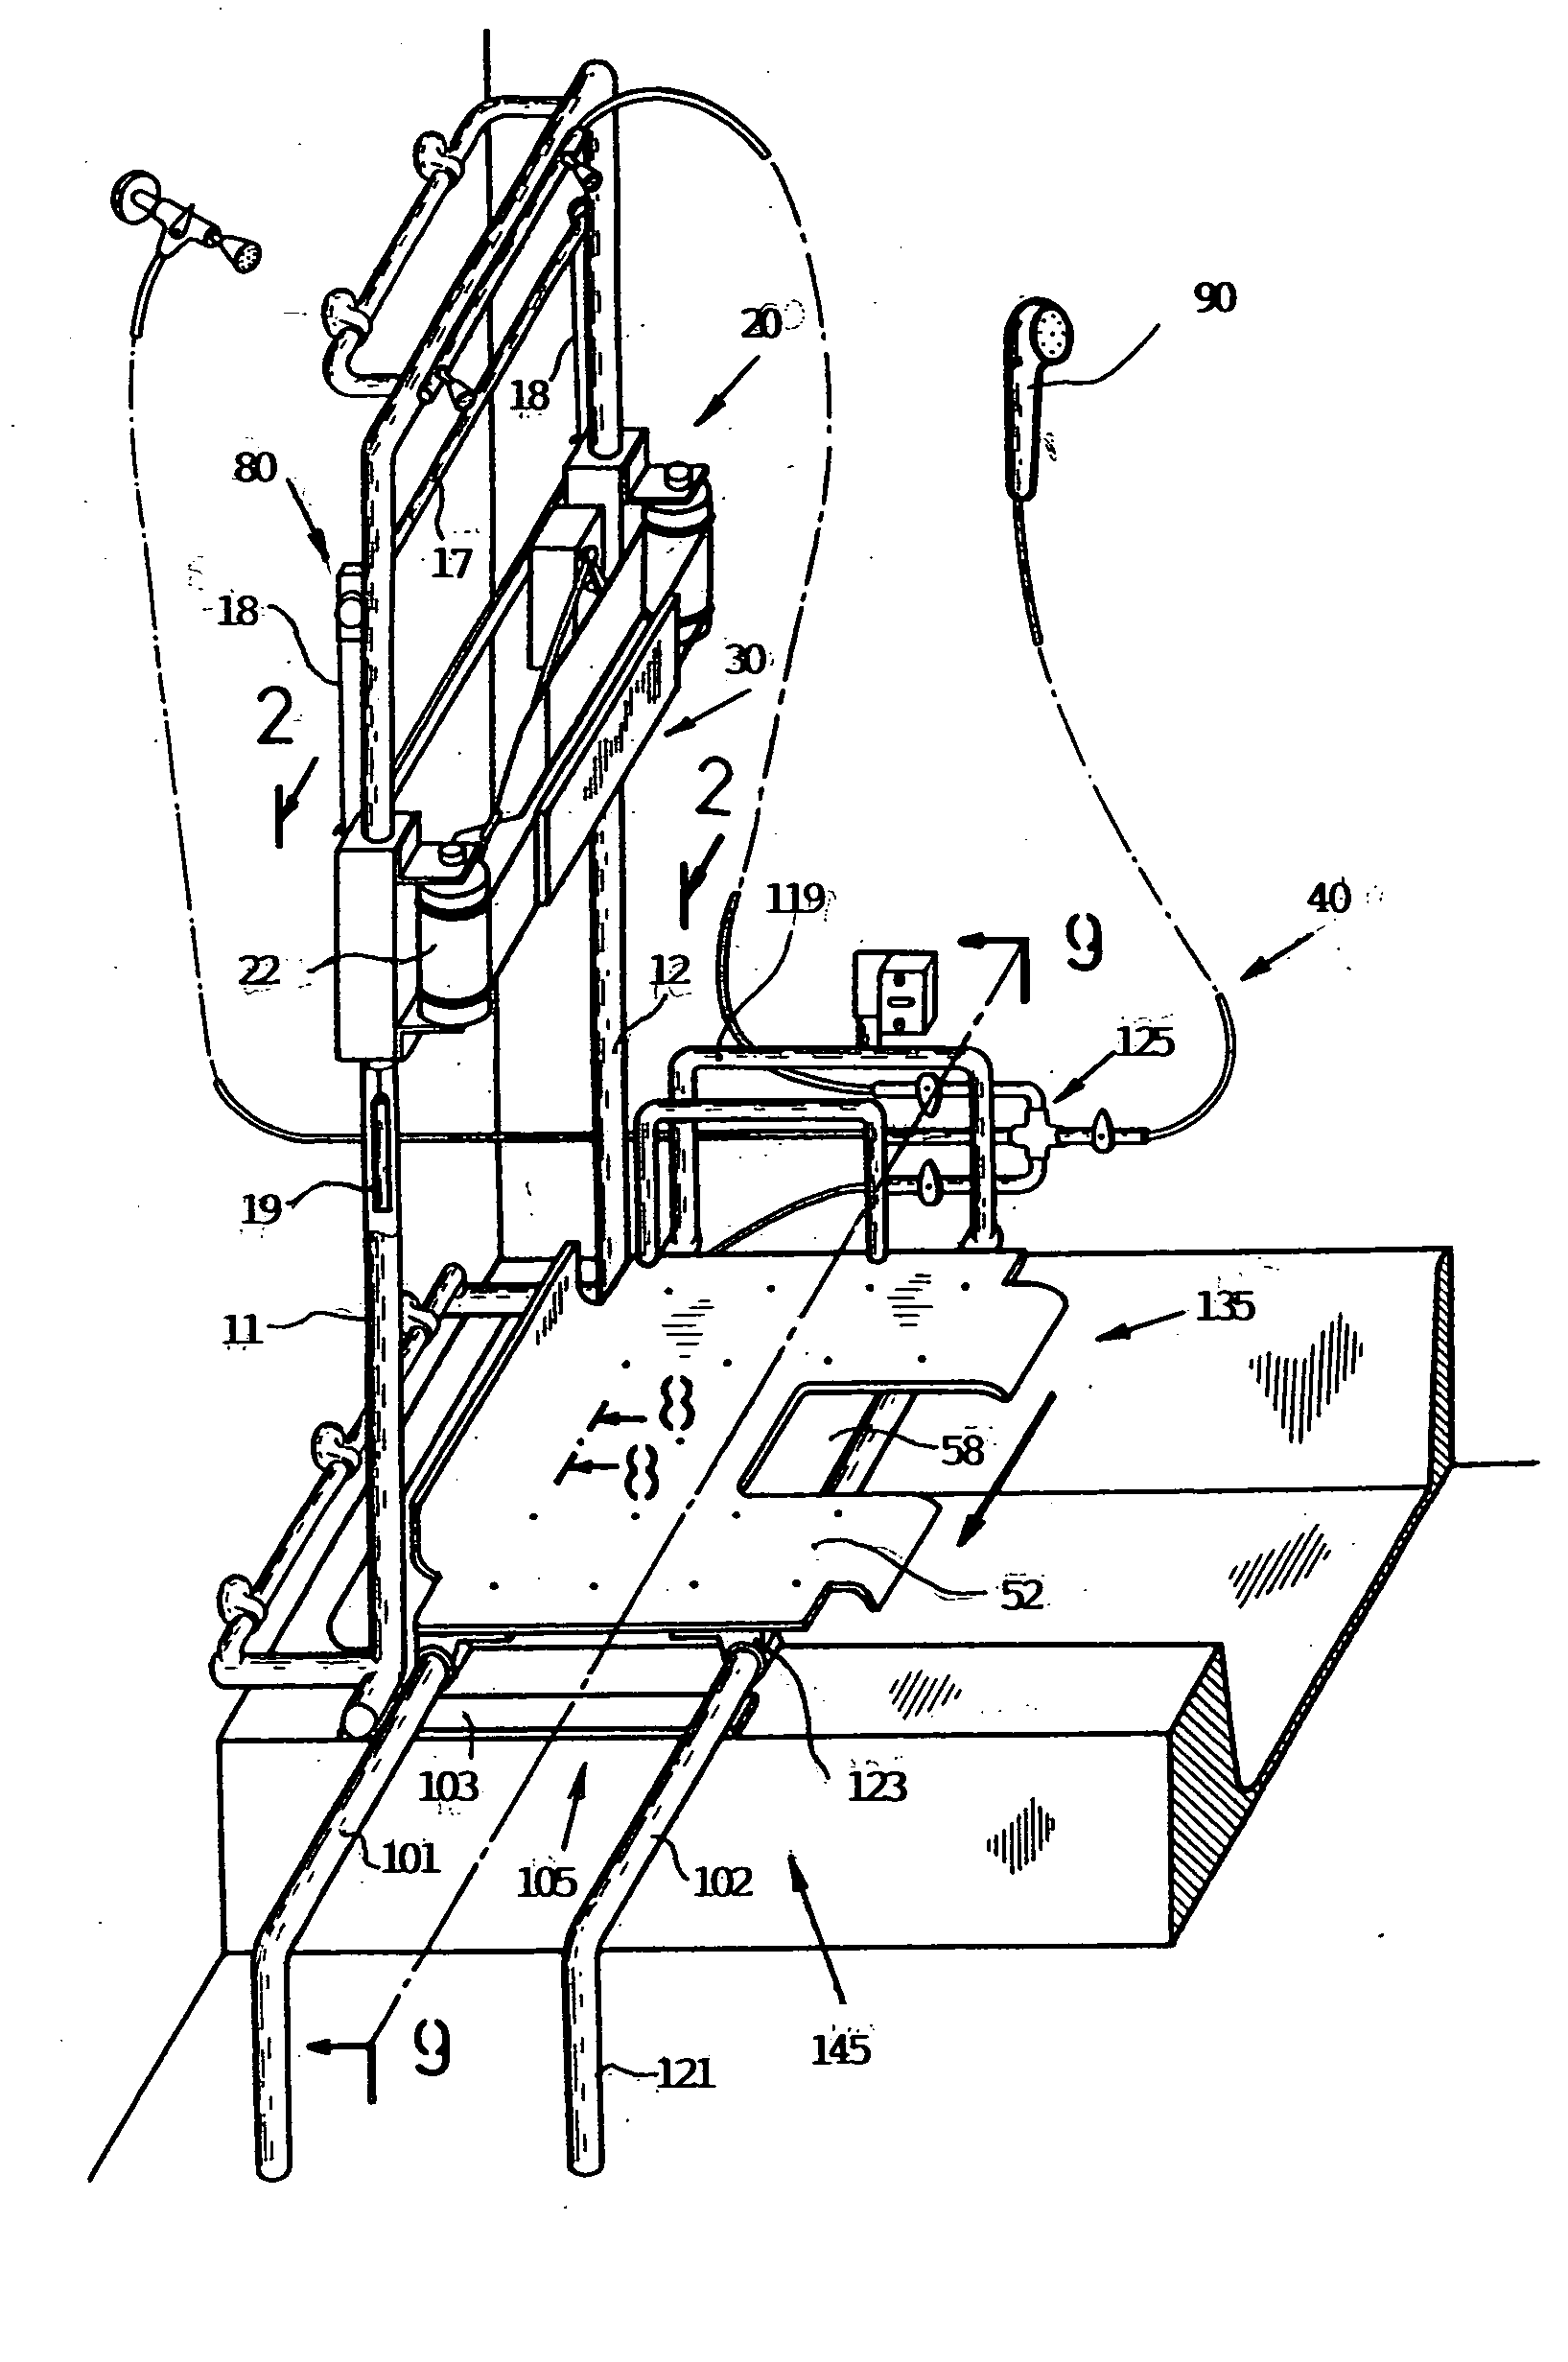 Apparatus for completely bathing onself by users of wheelchair and an elderly, infirm people